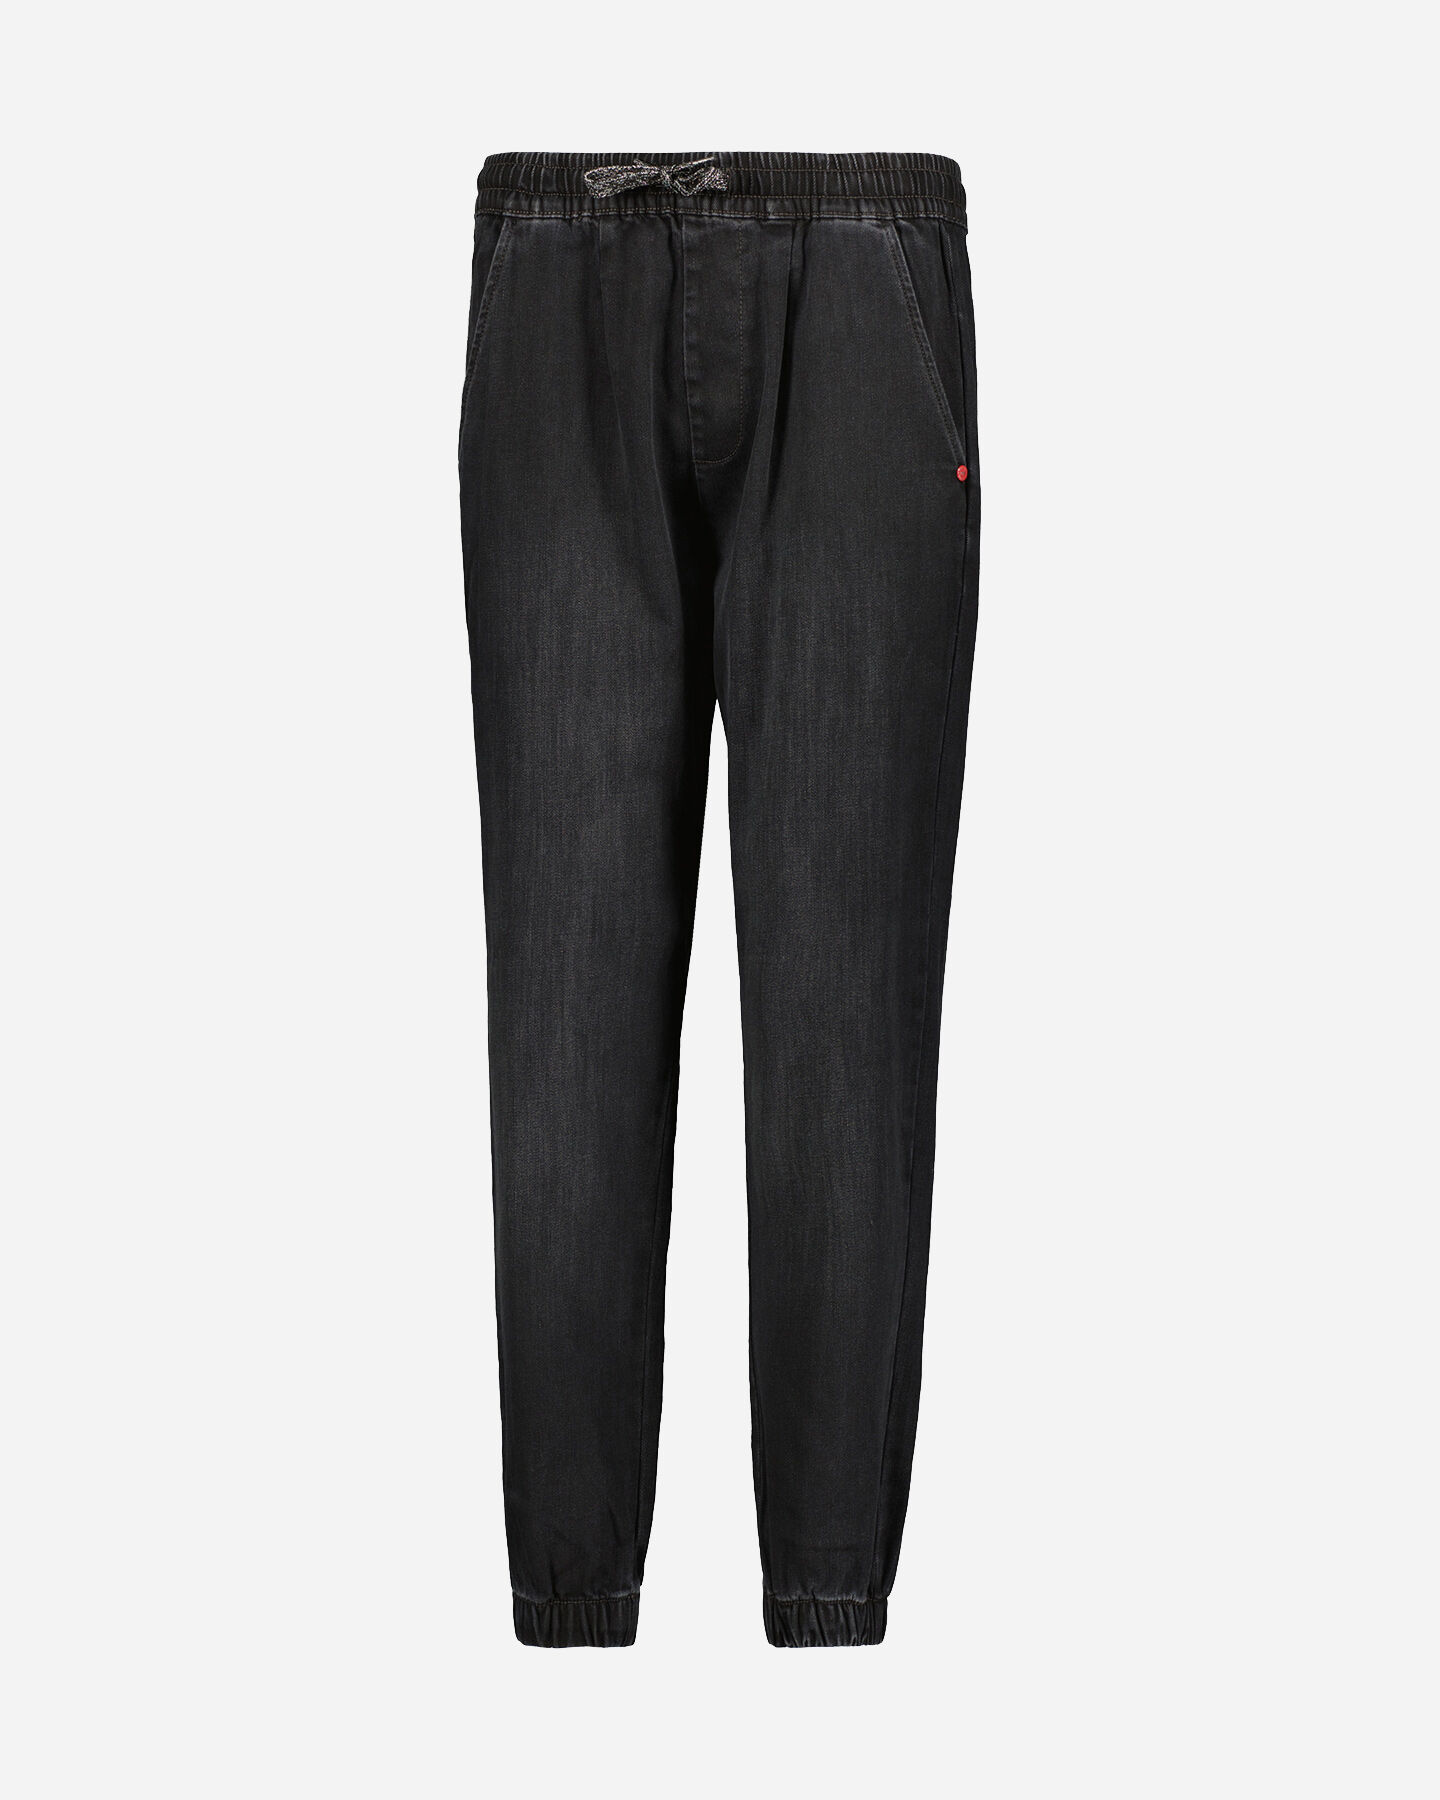  Pantalone MISTRAL JOGGER BRUSHED W S4107948|MD-BLACK|XS scatto 0